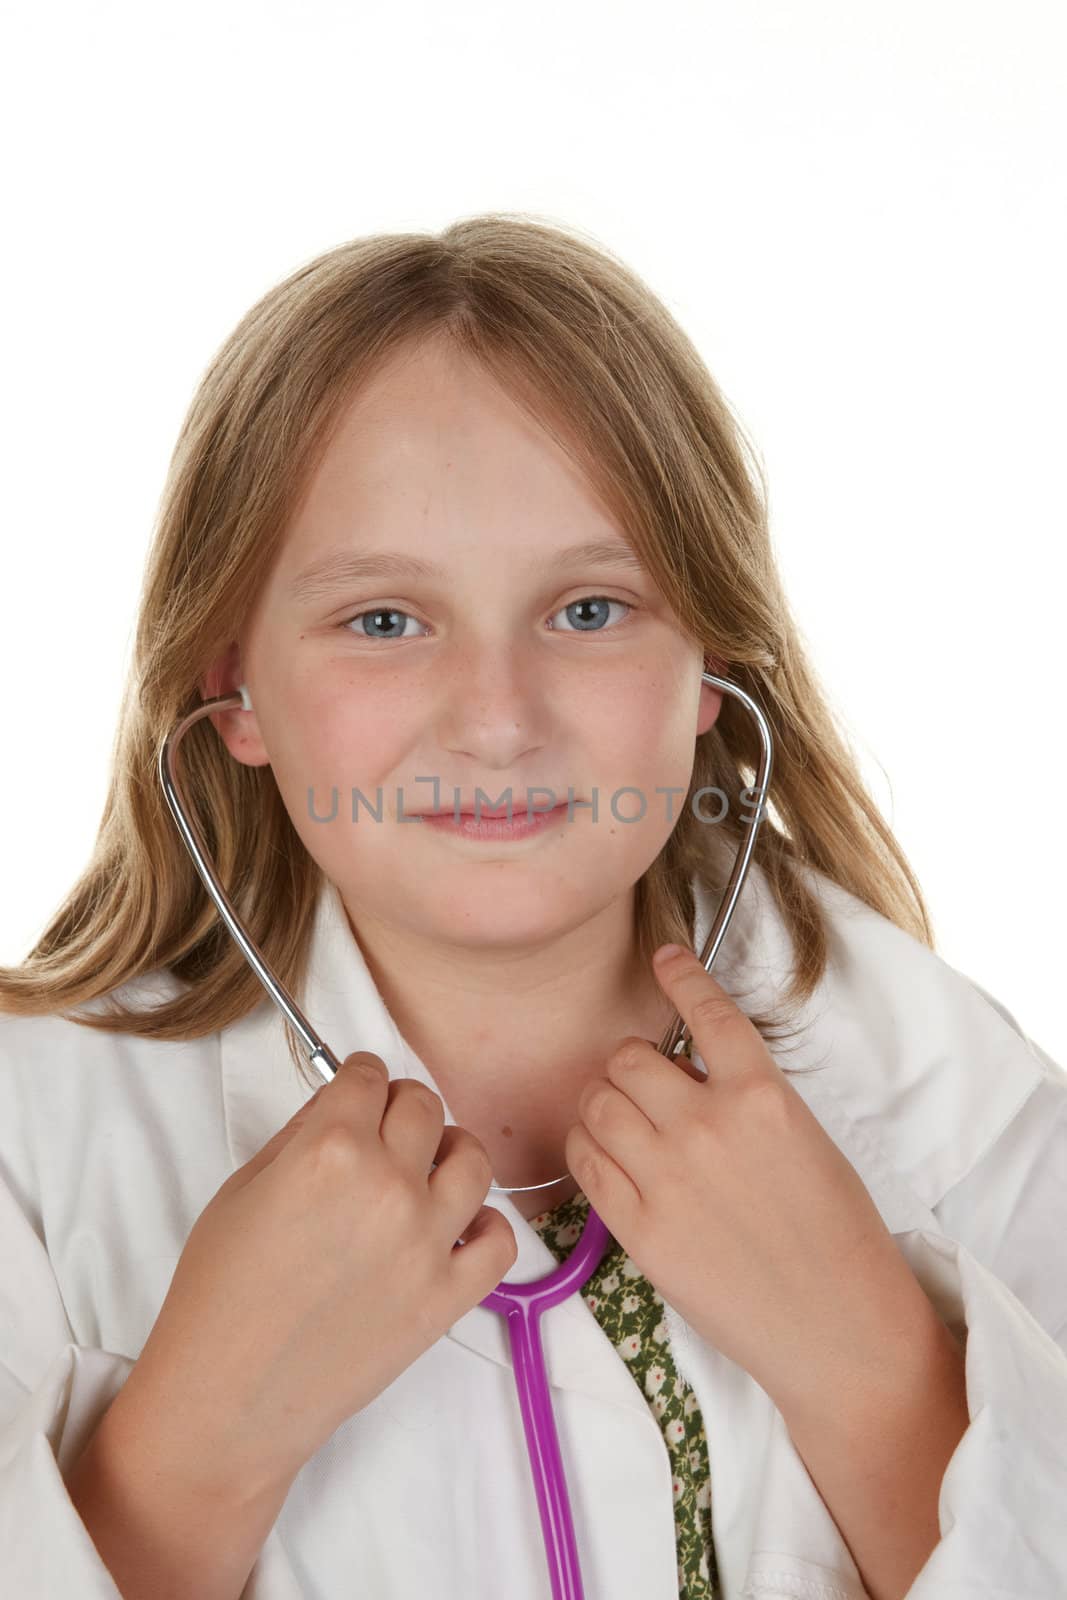 young girl wants to be a doctor by clearviewstock